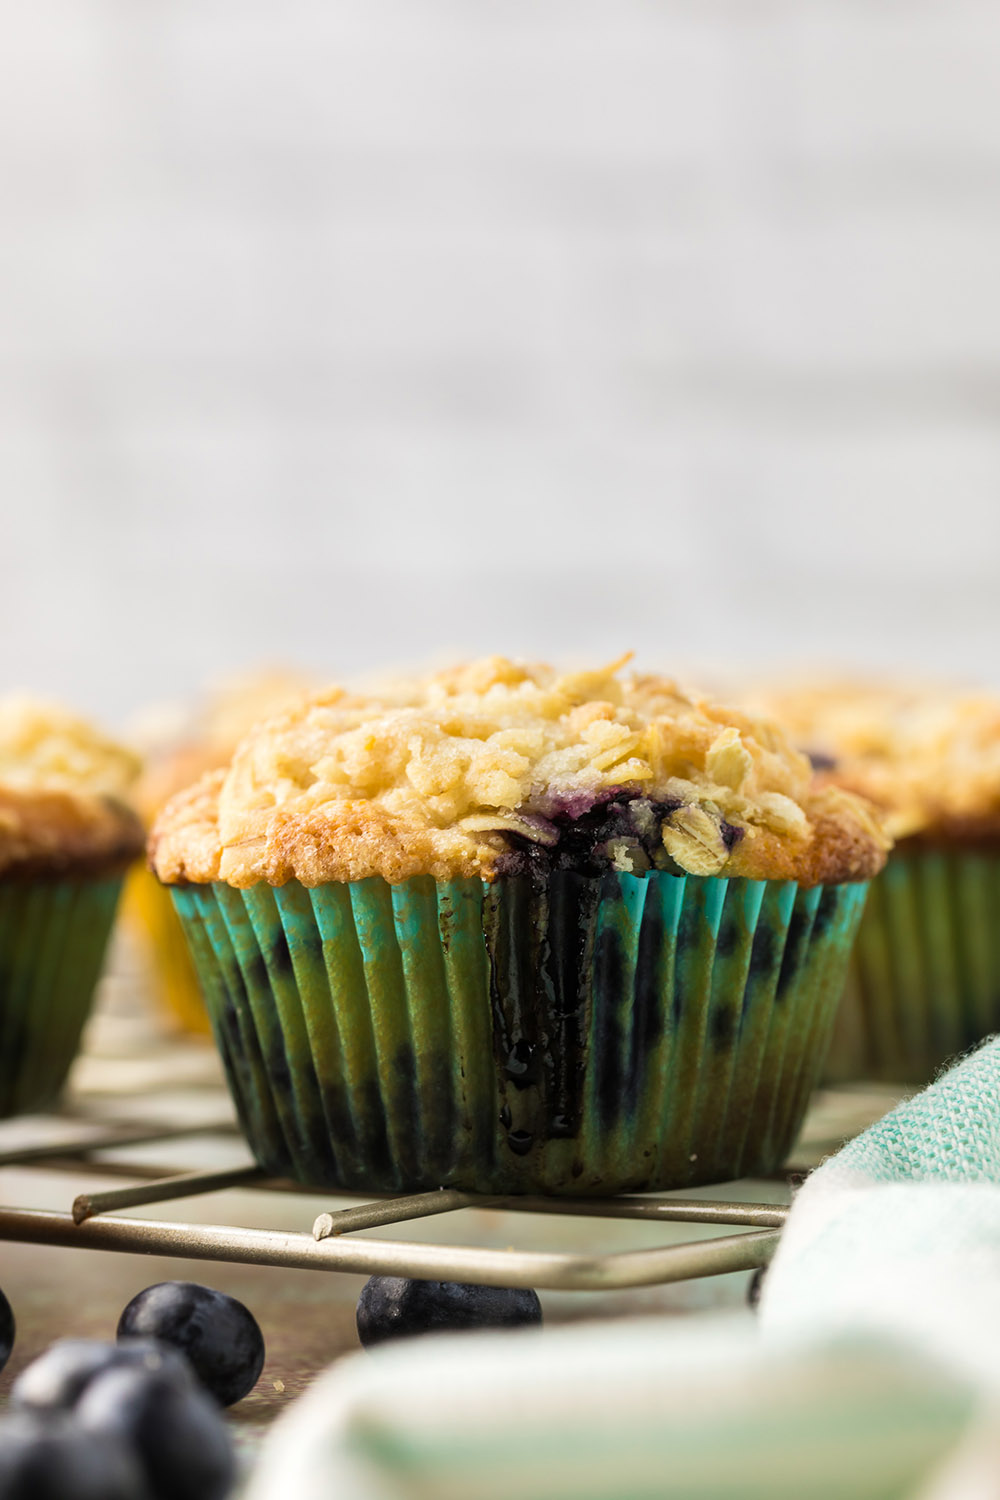 Blueberry muffin in a blue muffin liner.